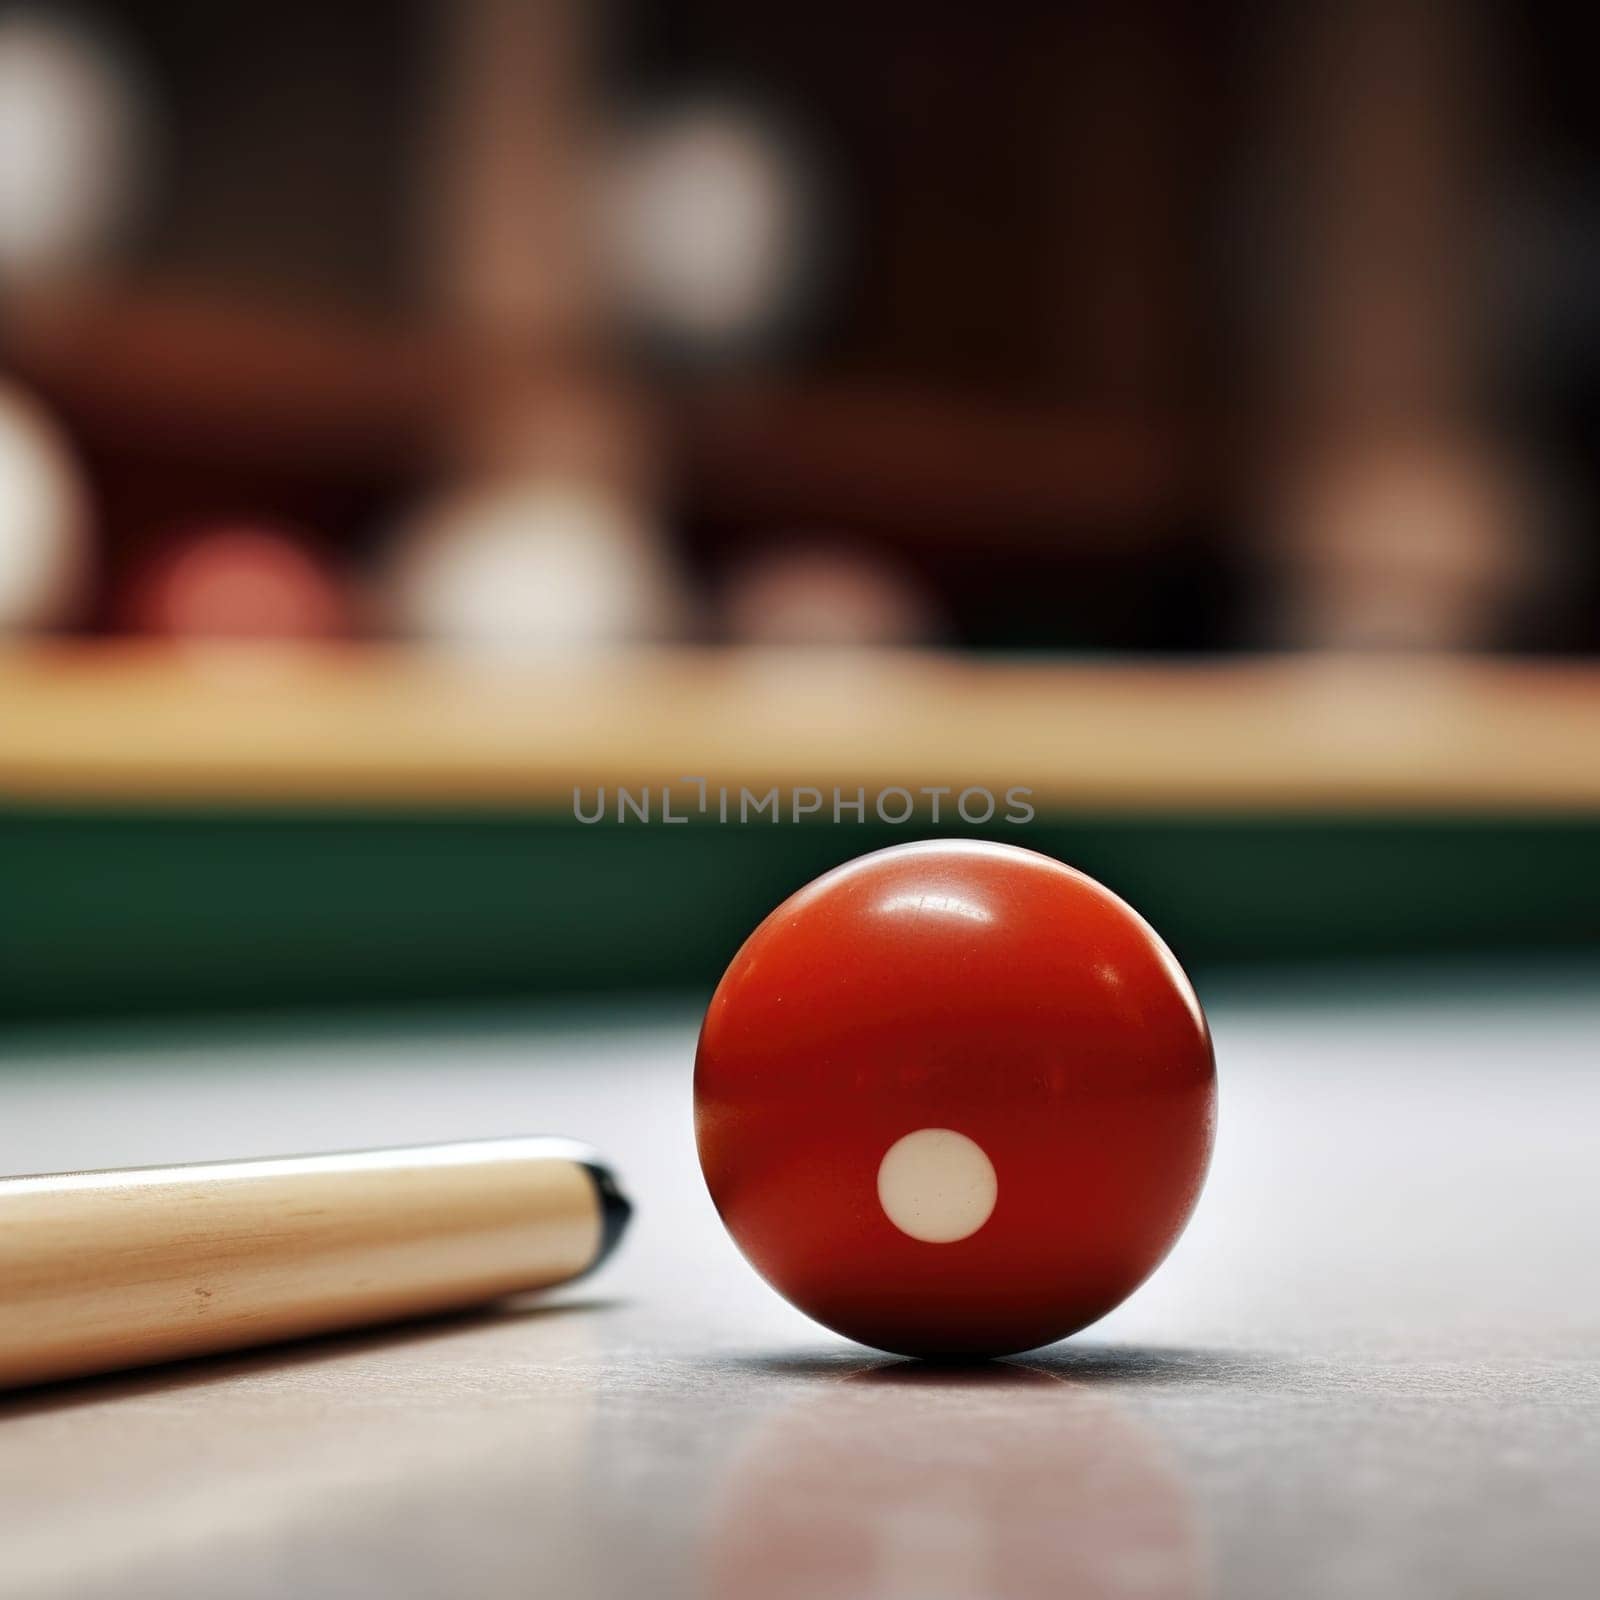 A billiard ball and a cue stick on a table, AI by starush